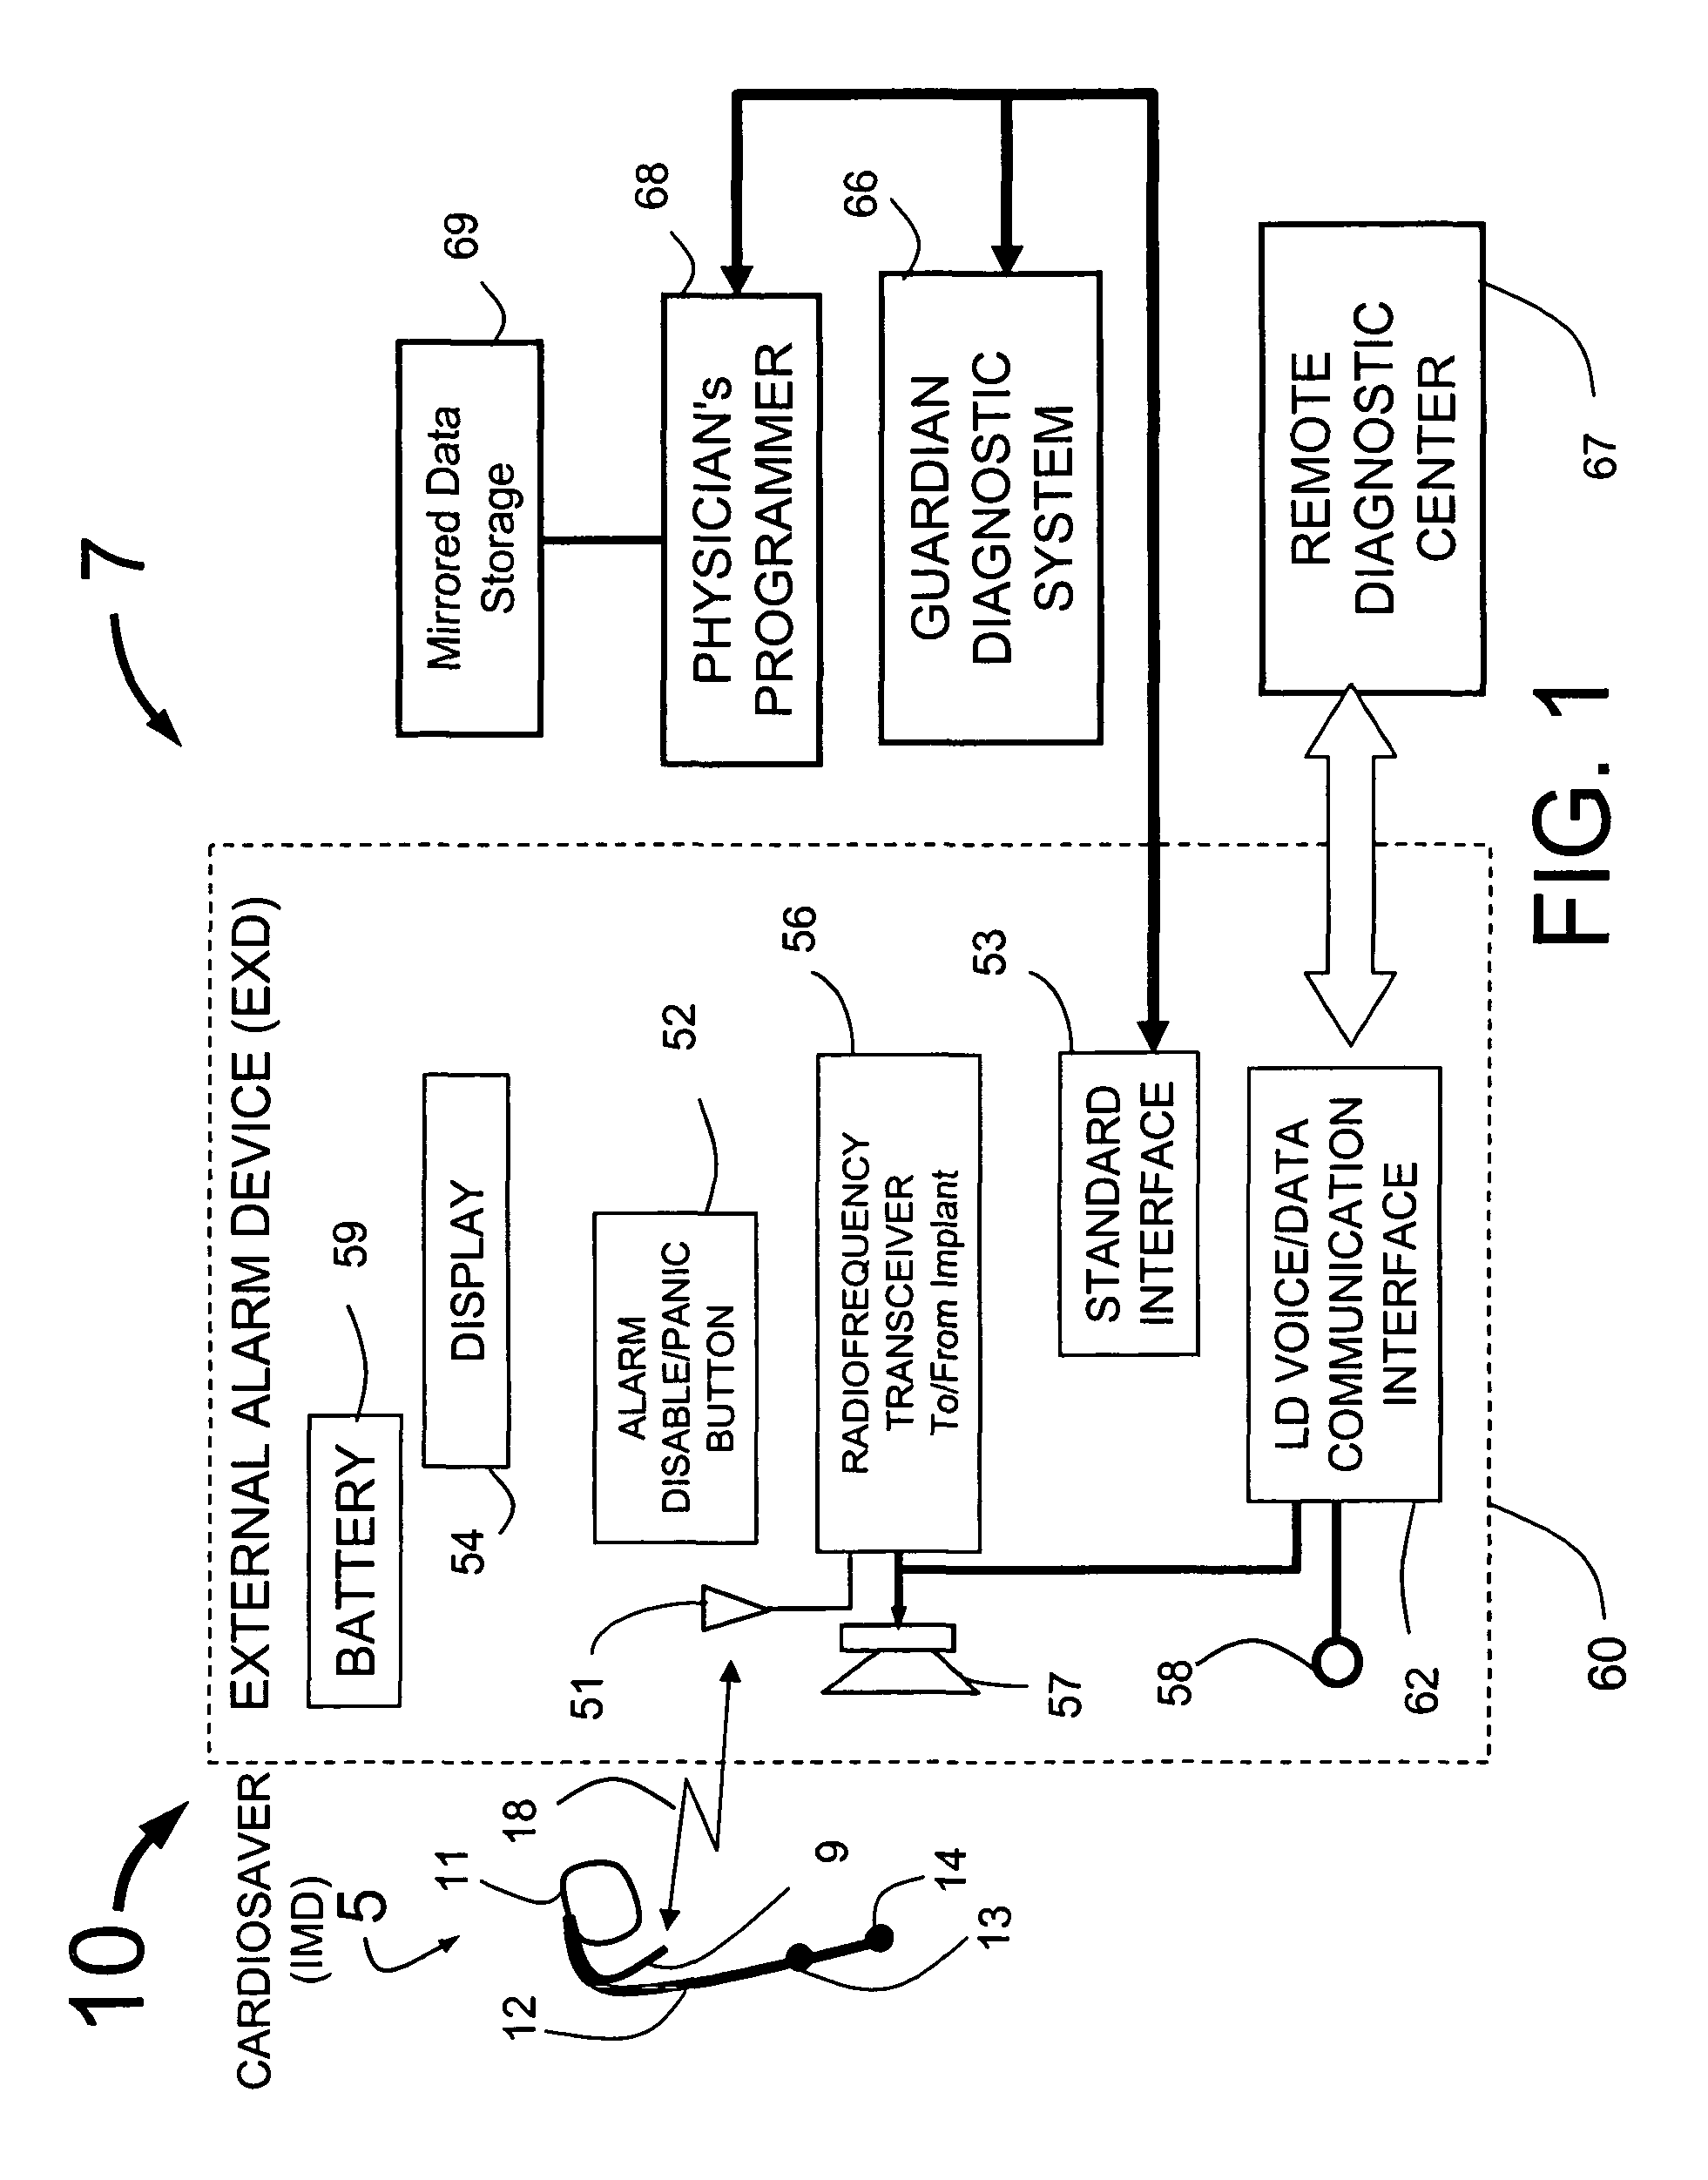 Physician's programmer for implantable devices having cardiac diagnostic and patient alerting capabilities